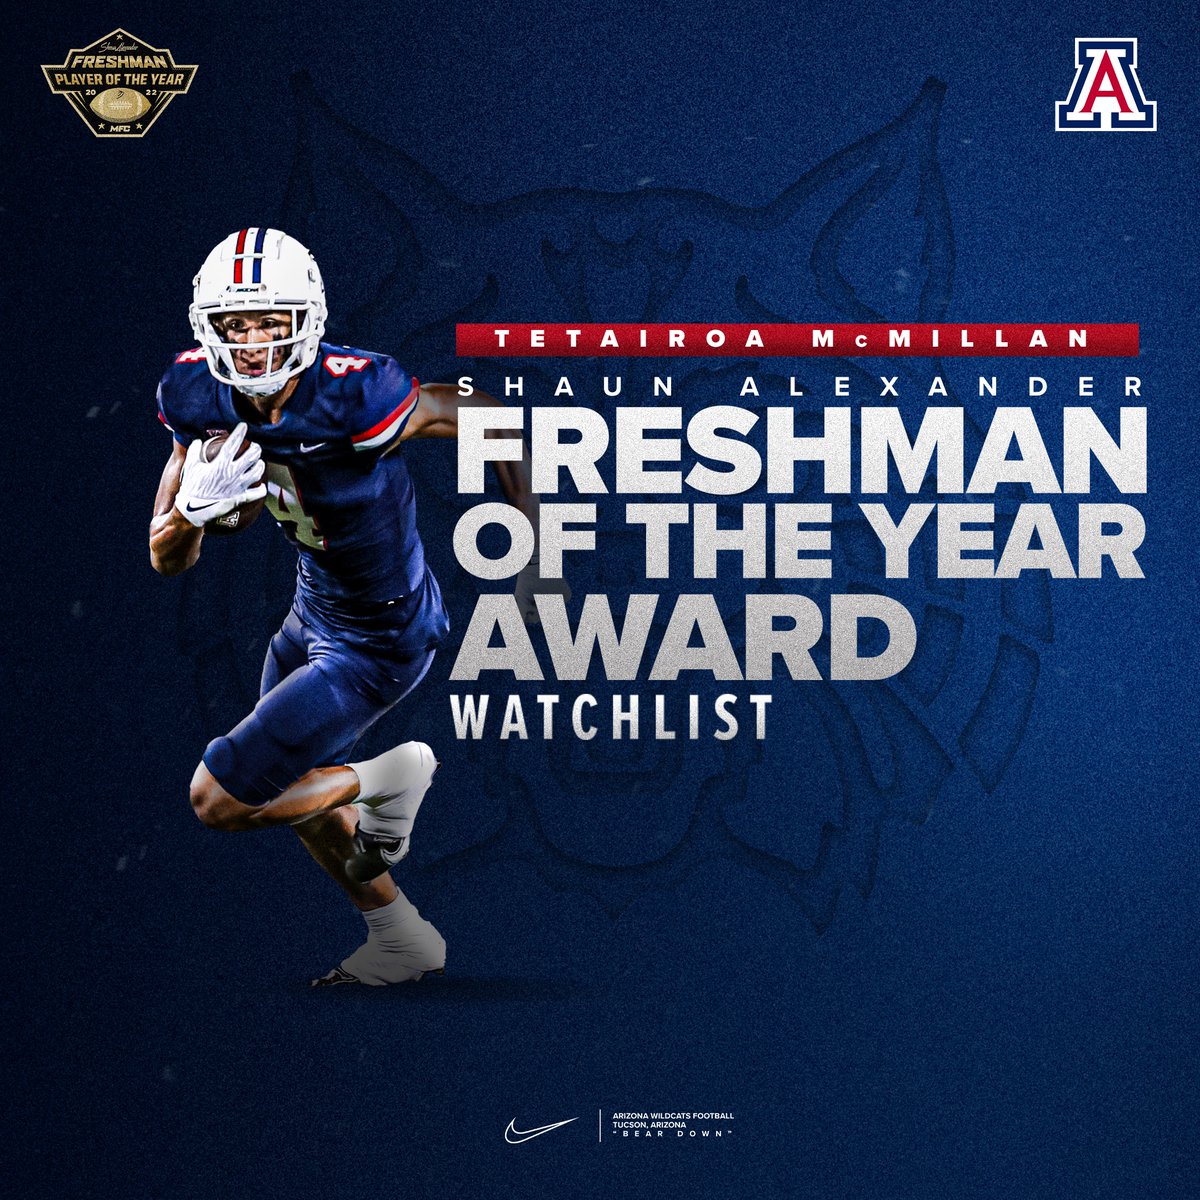 Congratulations to @TMAC96795 for being selected as a candidate for the Shaun Alexander Freshman of the Year Award. 🏆 #ItsPersonal | #RiseWithUs